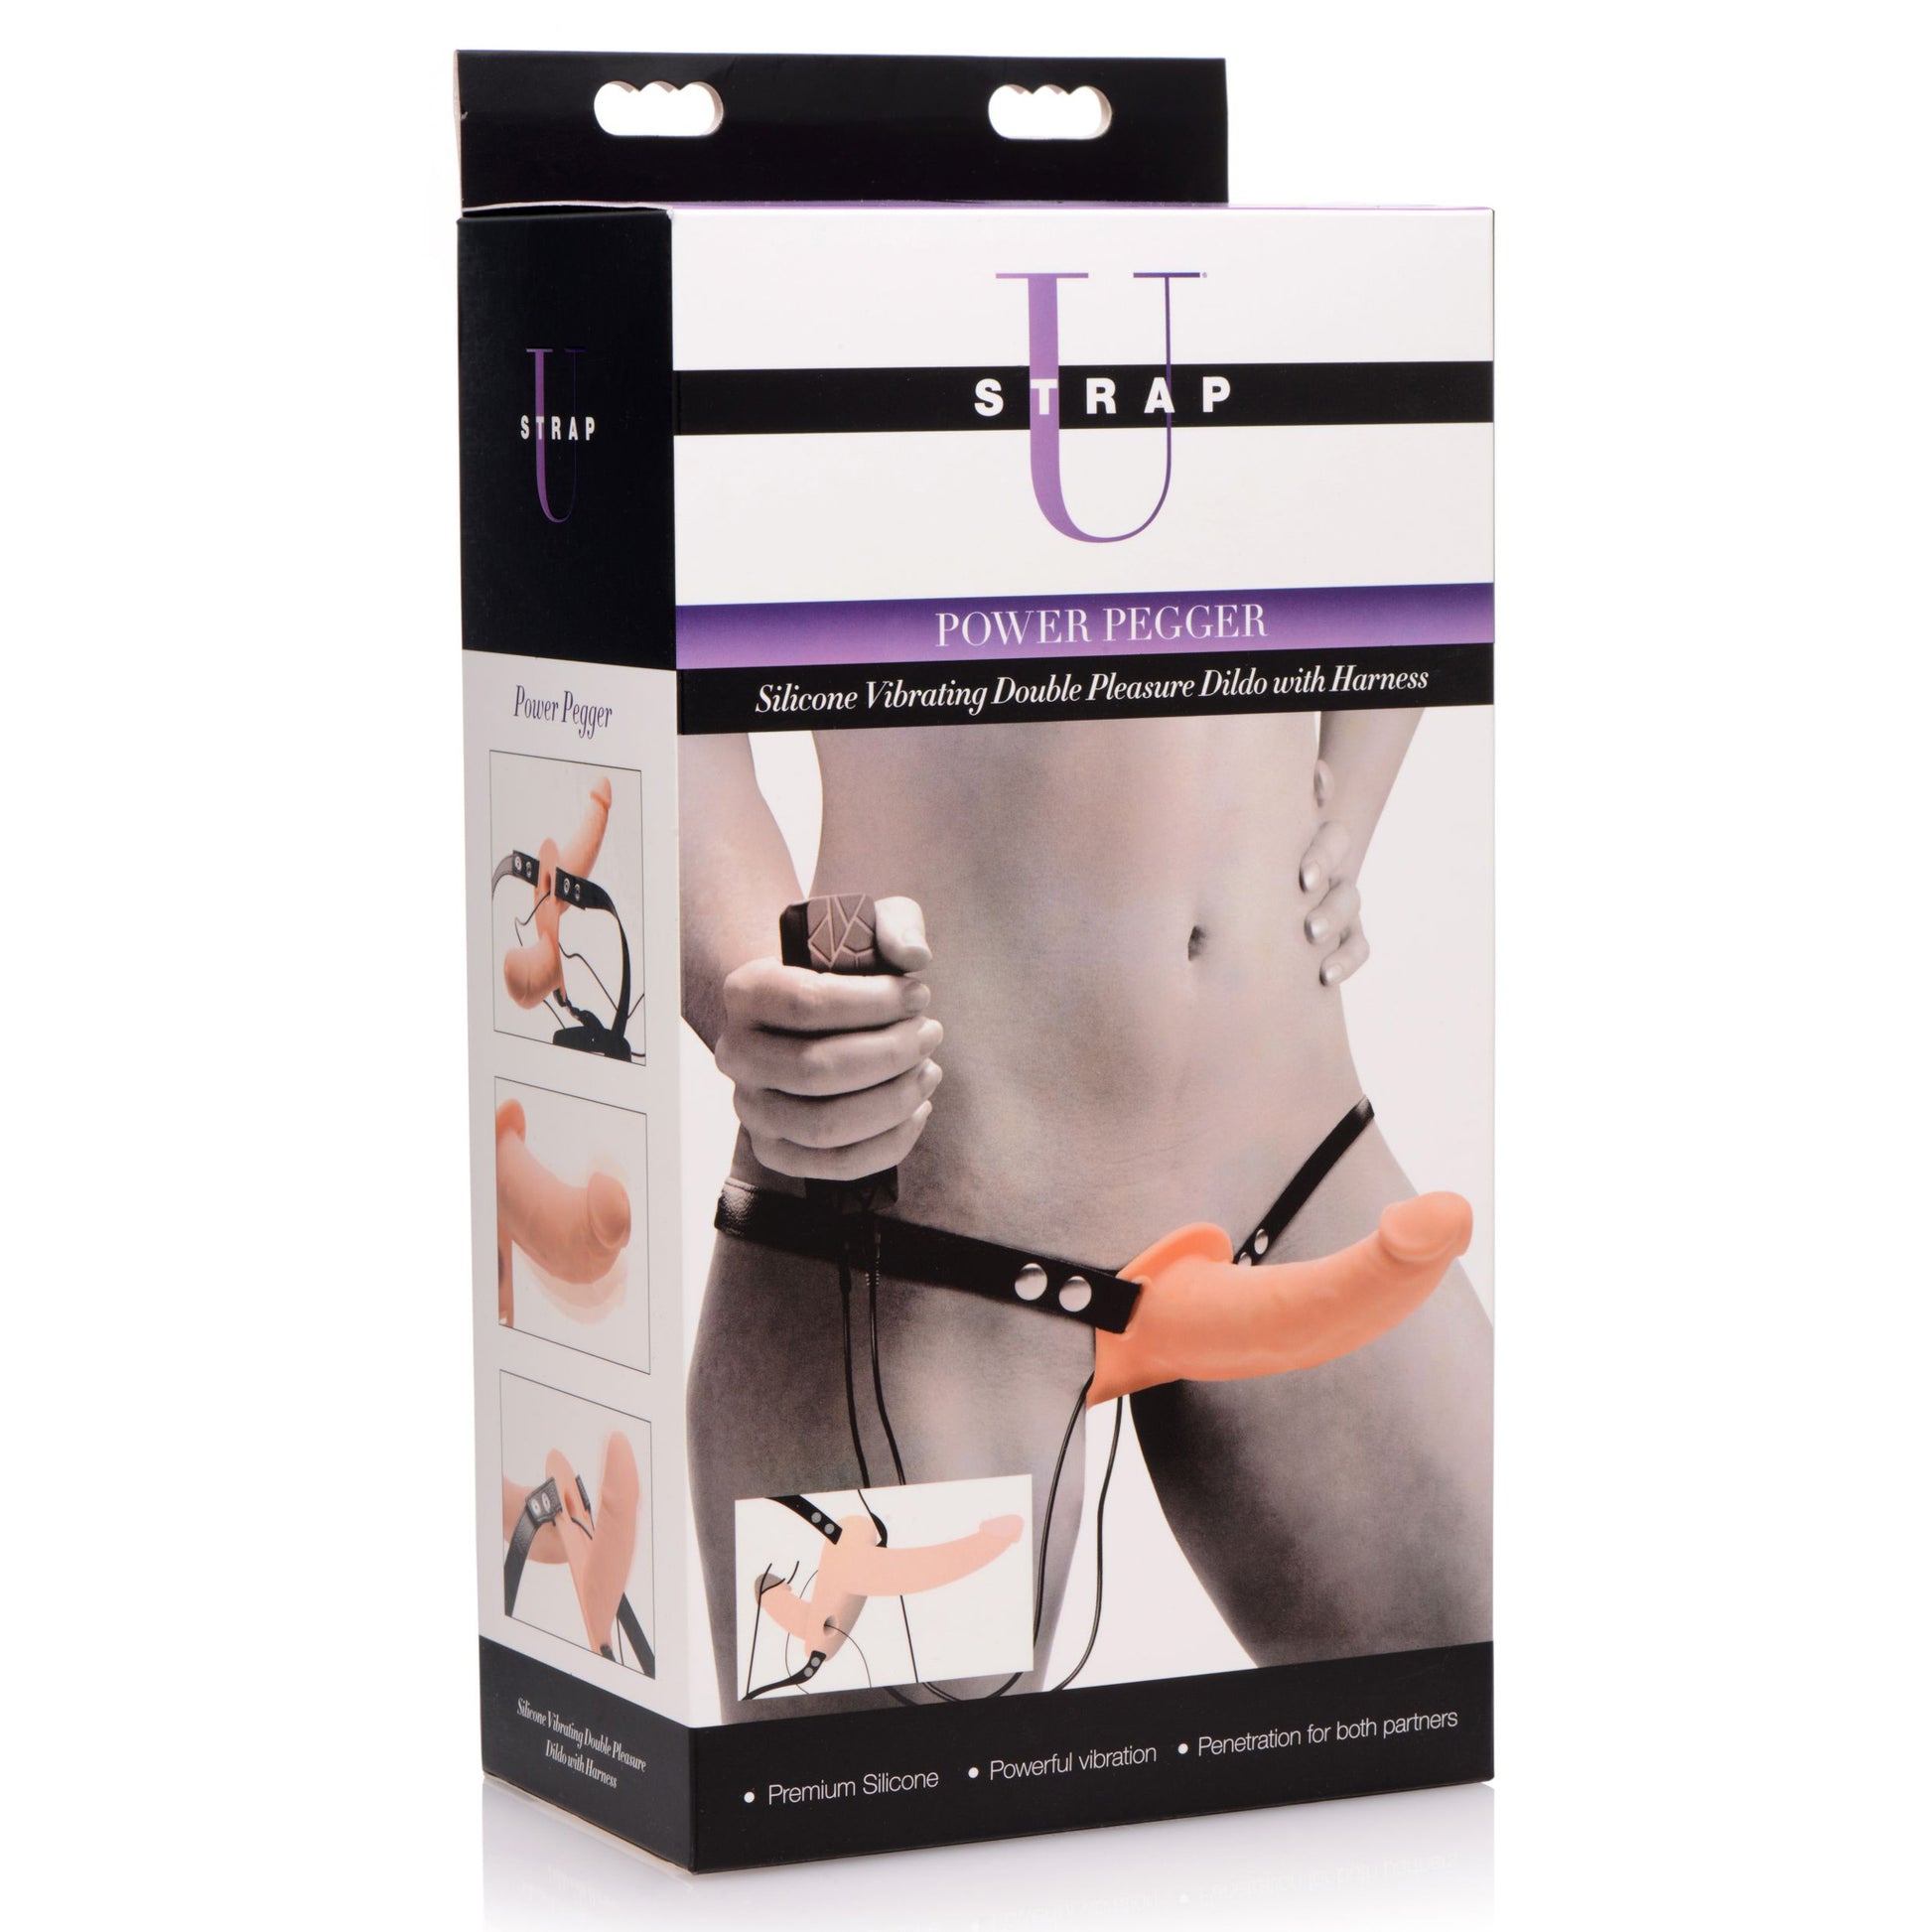 Power Pegger Silicone Vibrating Double Dildo with Harness - UABDSM